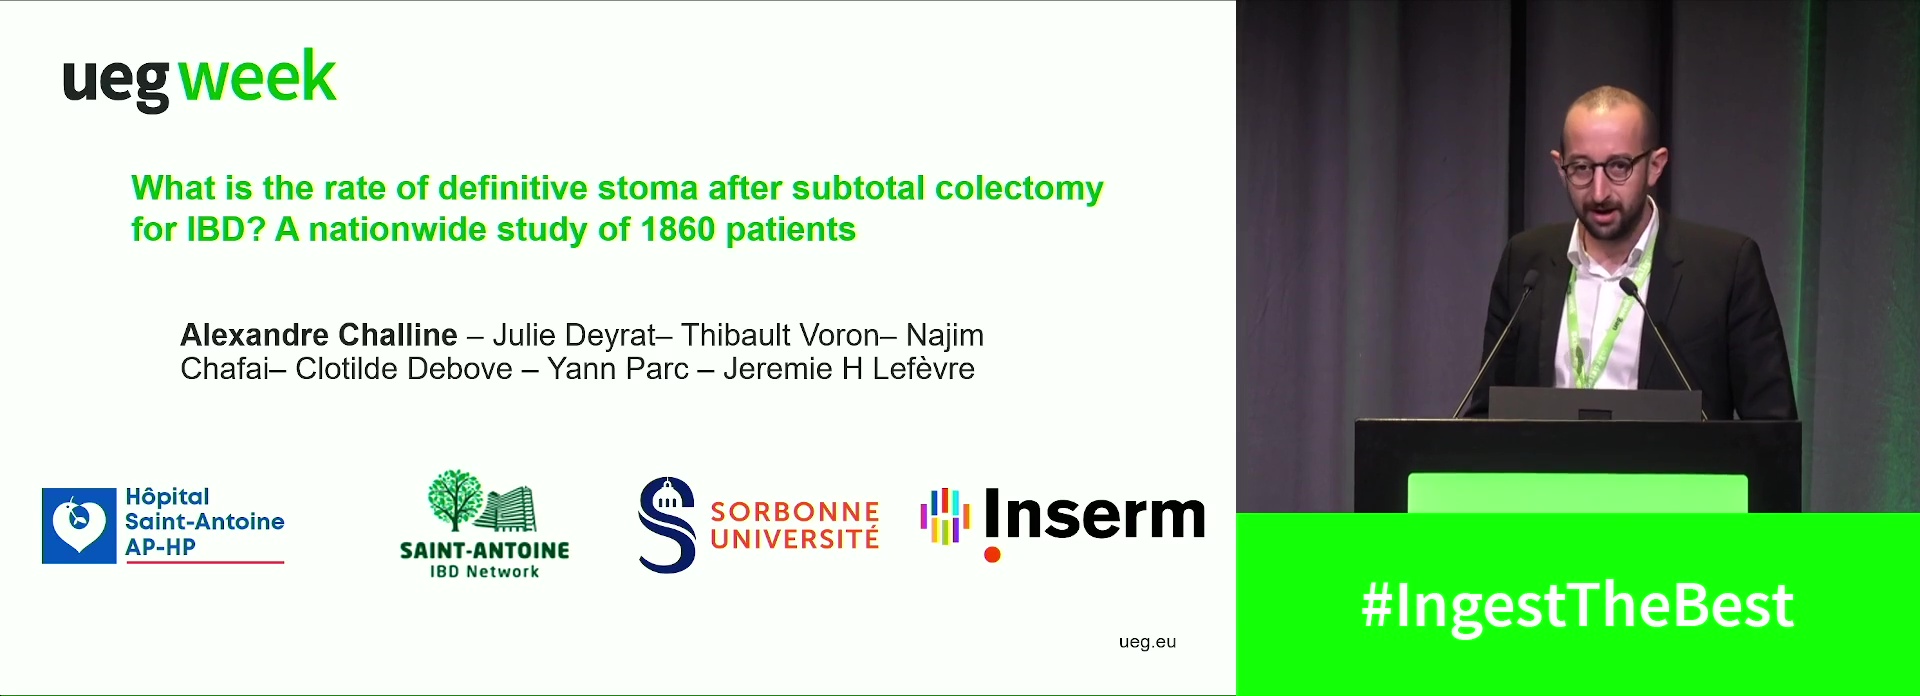 WHAT IS THE RATE OF DEFINITIVE STOMA AFTER SUBTOTAL COLECTOMY FOR INFLAMMATORY BOWEL DISEASE? A NATIONWIDE STUDY OF 1860 PATIENTS